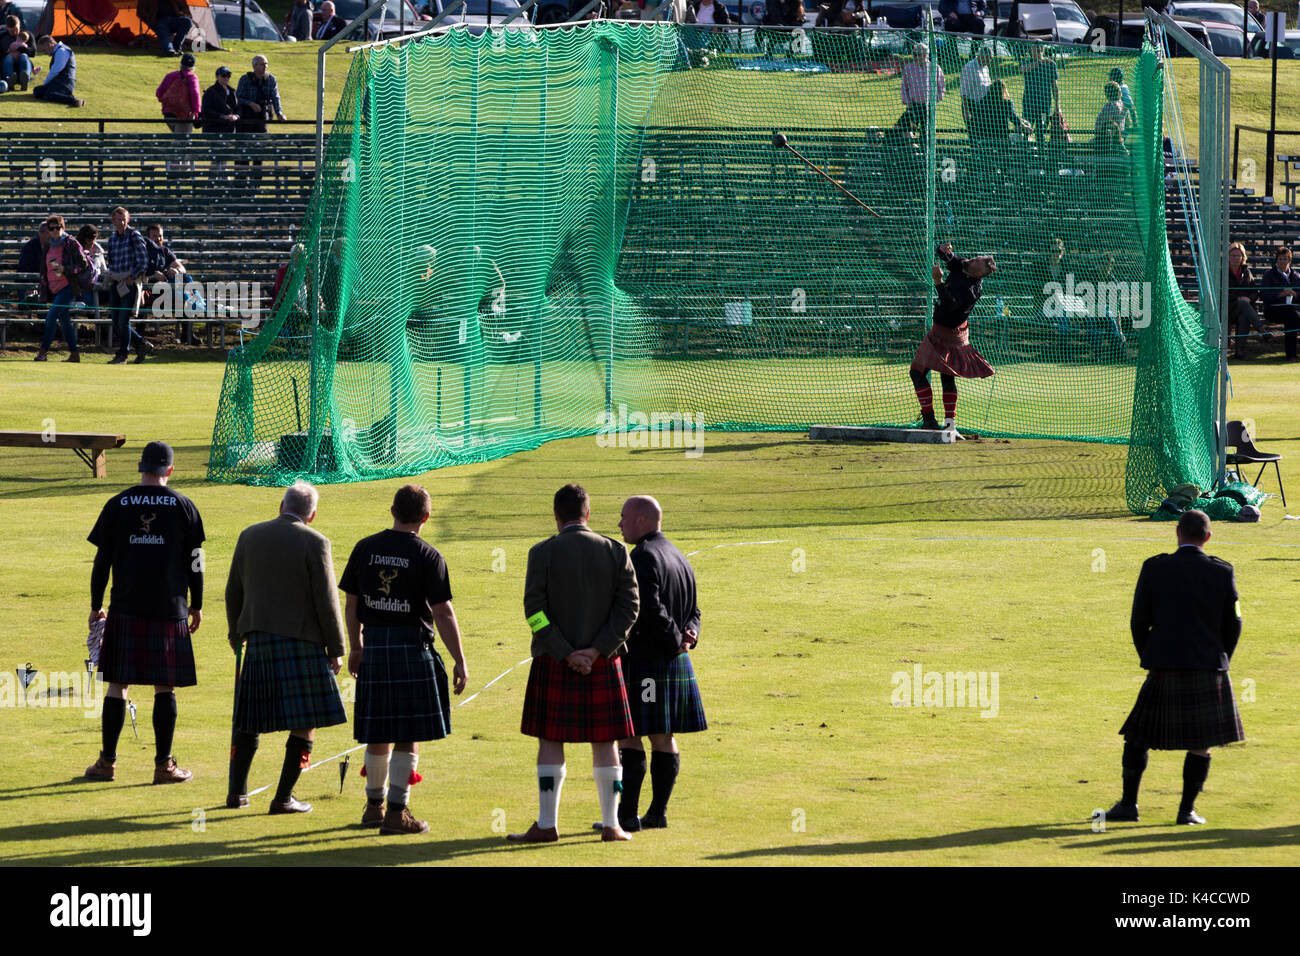 Braemar, Scotland, UK. 02 Sep, 2017: Athletes competing at the 22lb Hammer Throw event during the 2017 Braemar Highland Games. Stock Photo